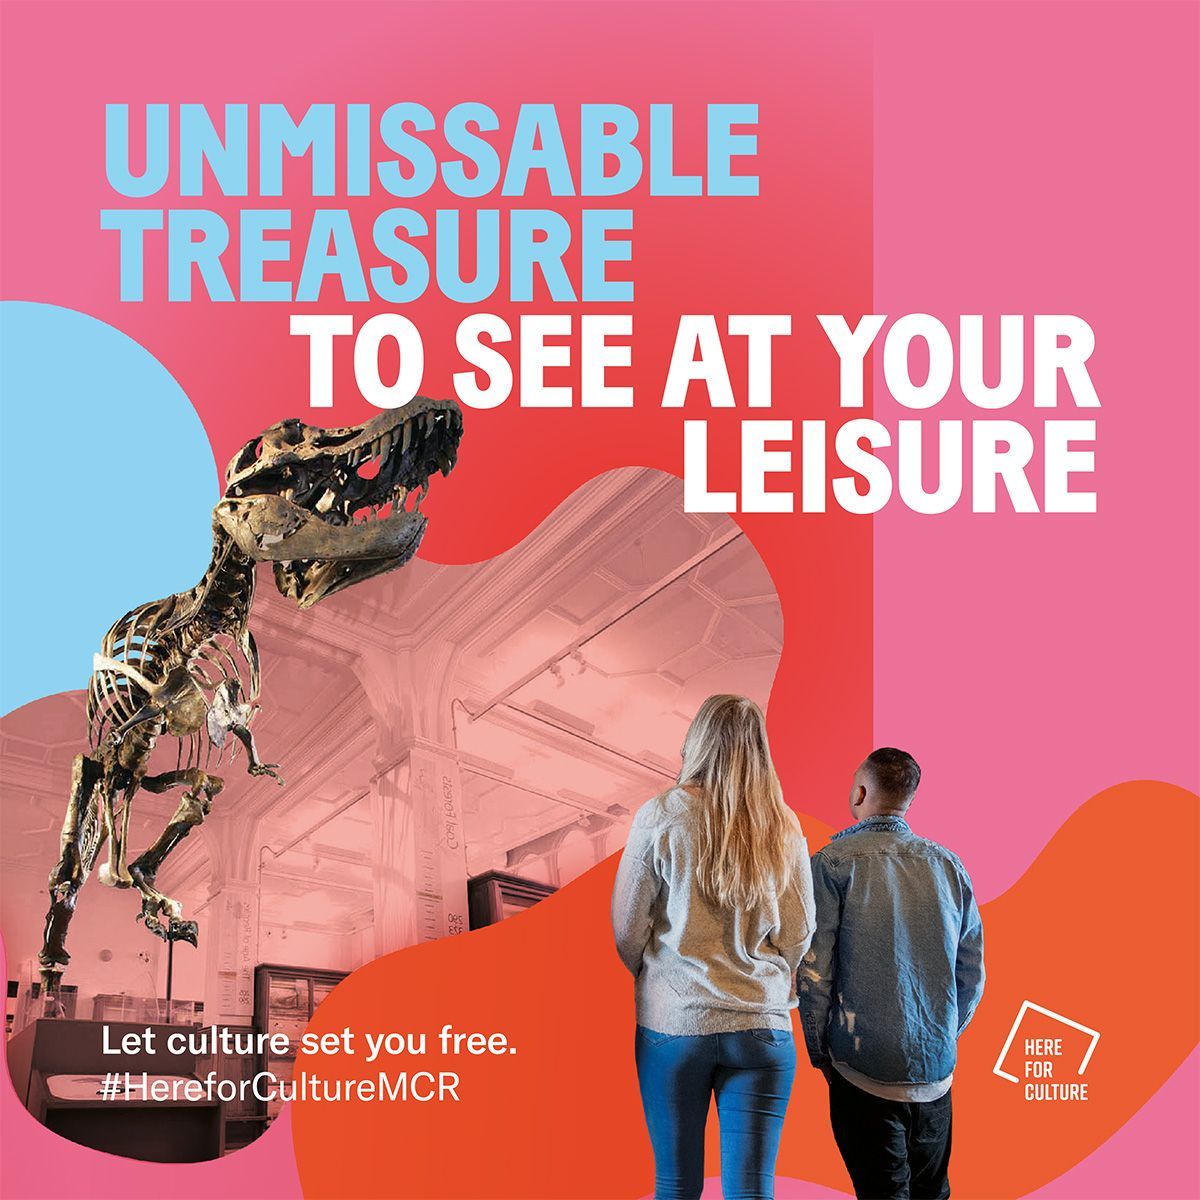 #WelcomeBack to many of #Manchester's cultural venues, reopen from today. We can't wait to visit! 

@mcrartgallery
@sim_manchester
@McrMuseum
@CastlefieldGall
@CFCCA_UK
@HOME_mcr
@PHMMcr
@The_Lowry
@WhitworthArt 

#HereForCultureMCR #HereforCulture